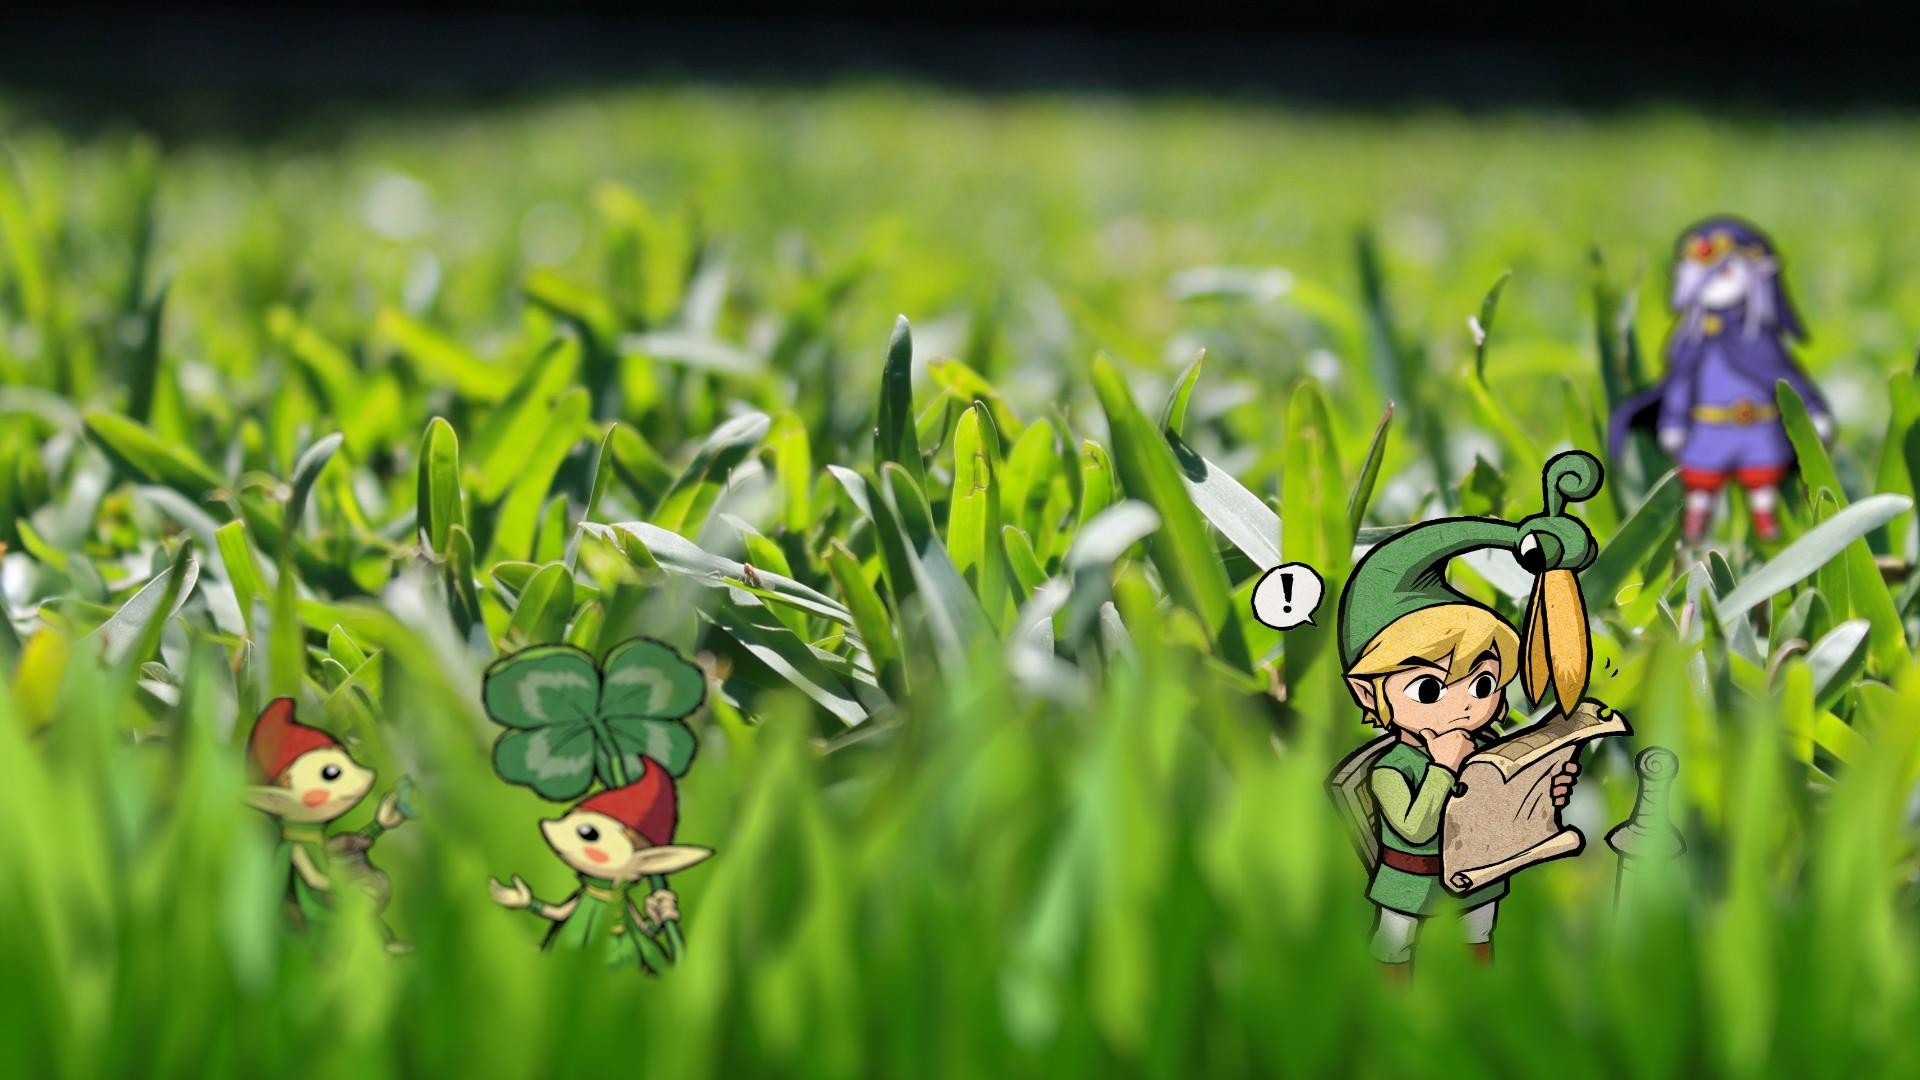 1920x1080 I couldn't find a proper  Minish Cap Wallpaper, I so I made my  own. Any Suggestions?